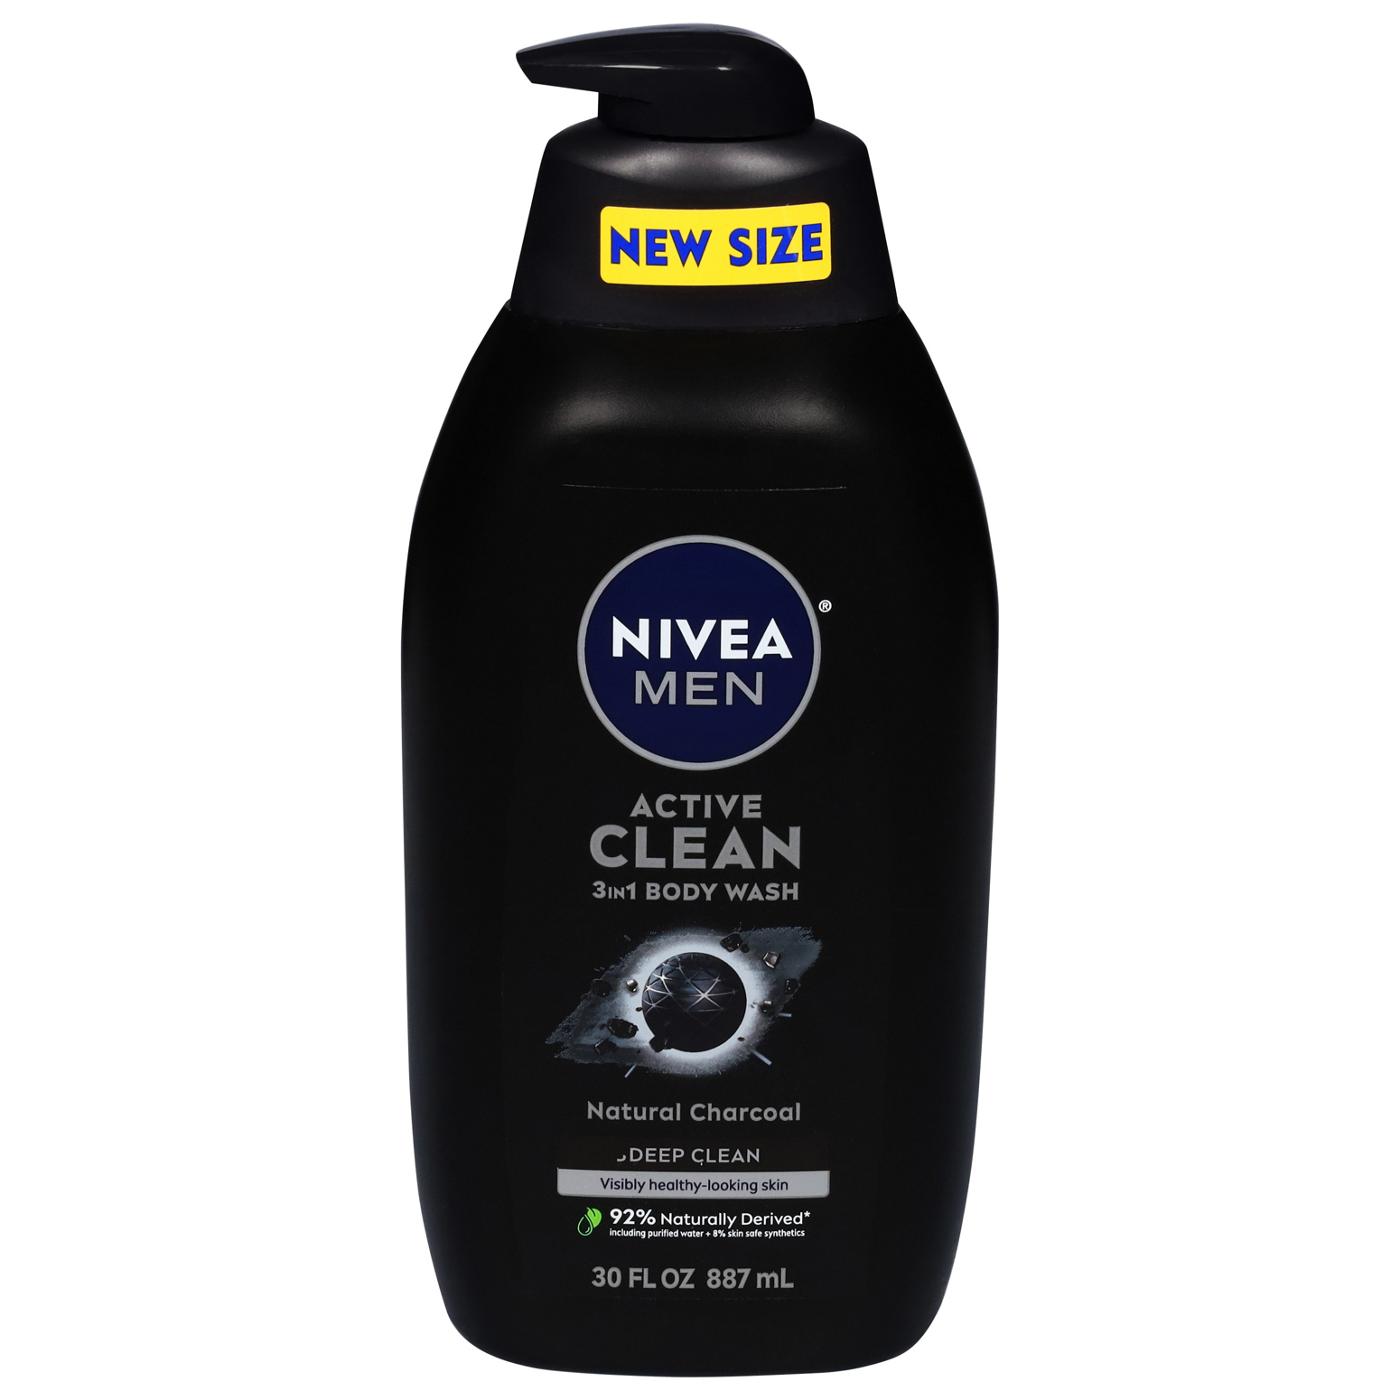 NIVEA Men Active Clean 3- in-1 Body Wash - Deep Clean with Natural Charcoal ; image 1 of 2